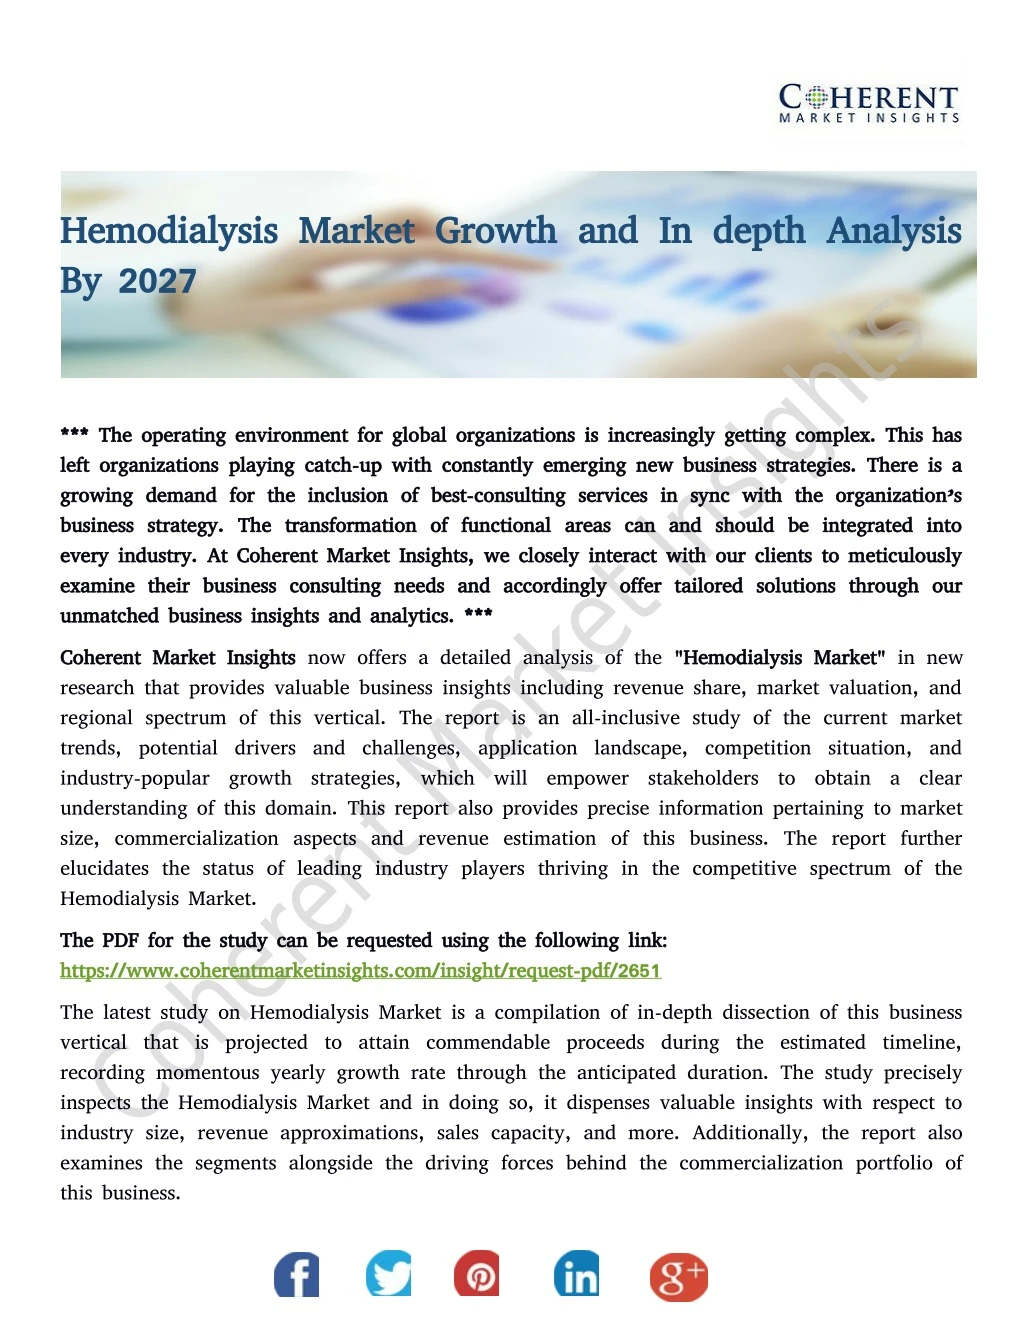 hemodialysis market growth and in depth analysis